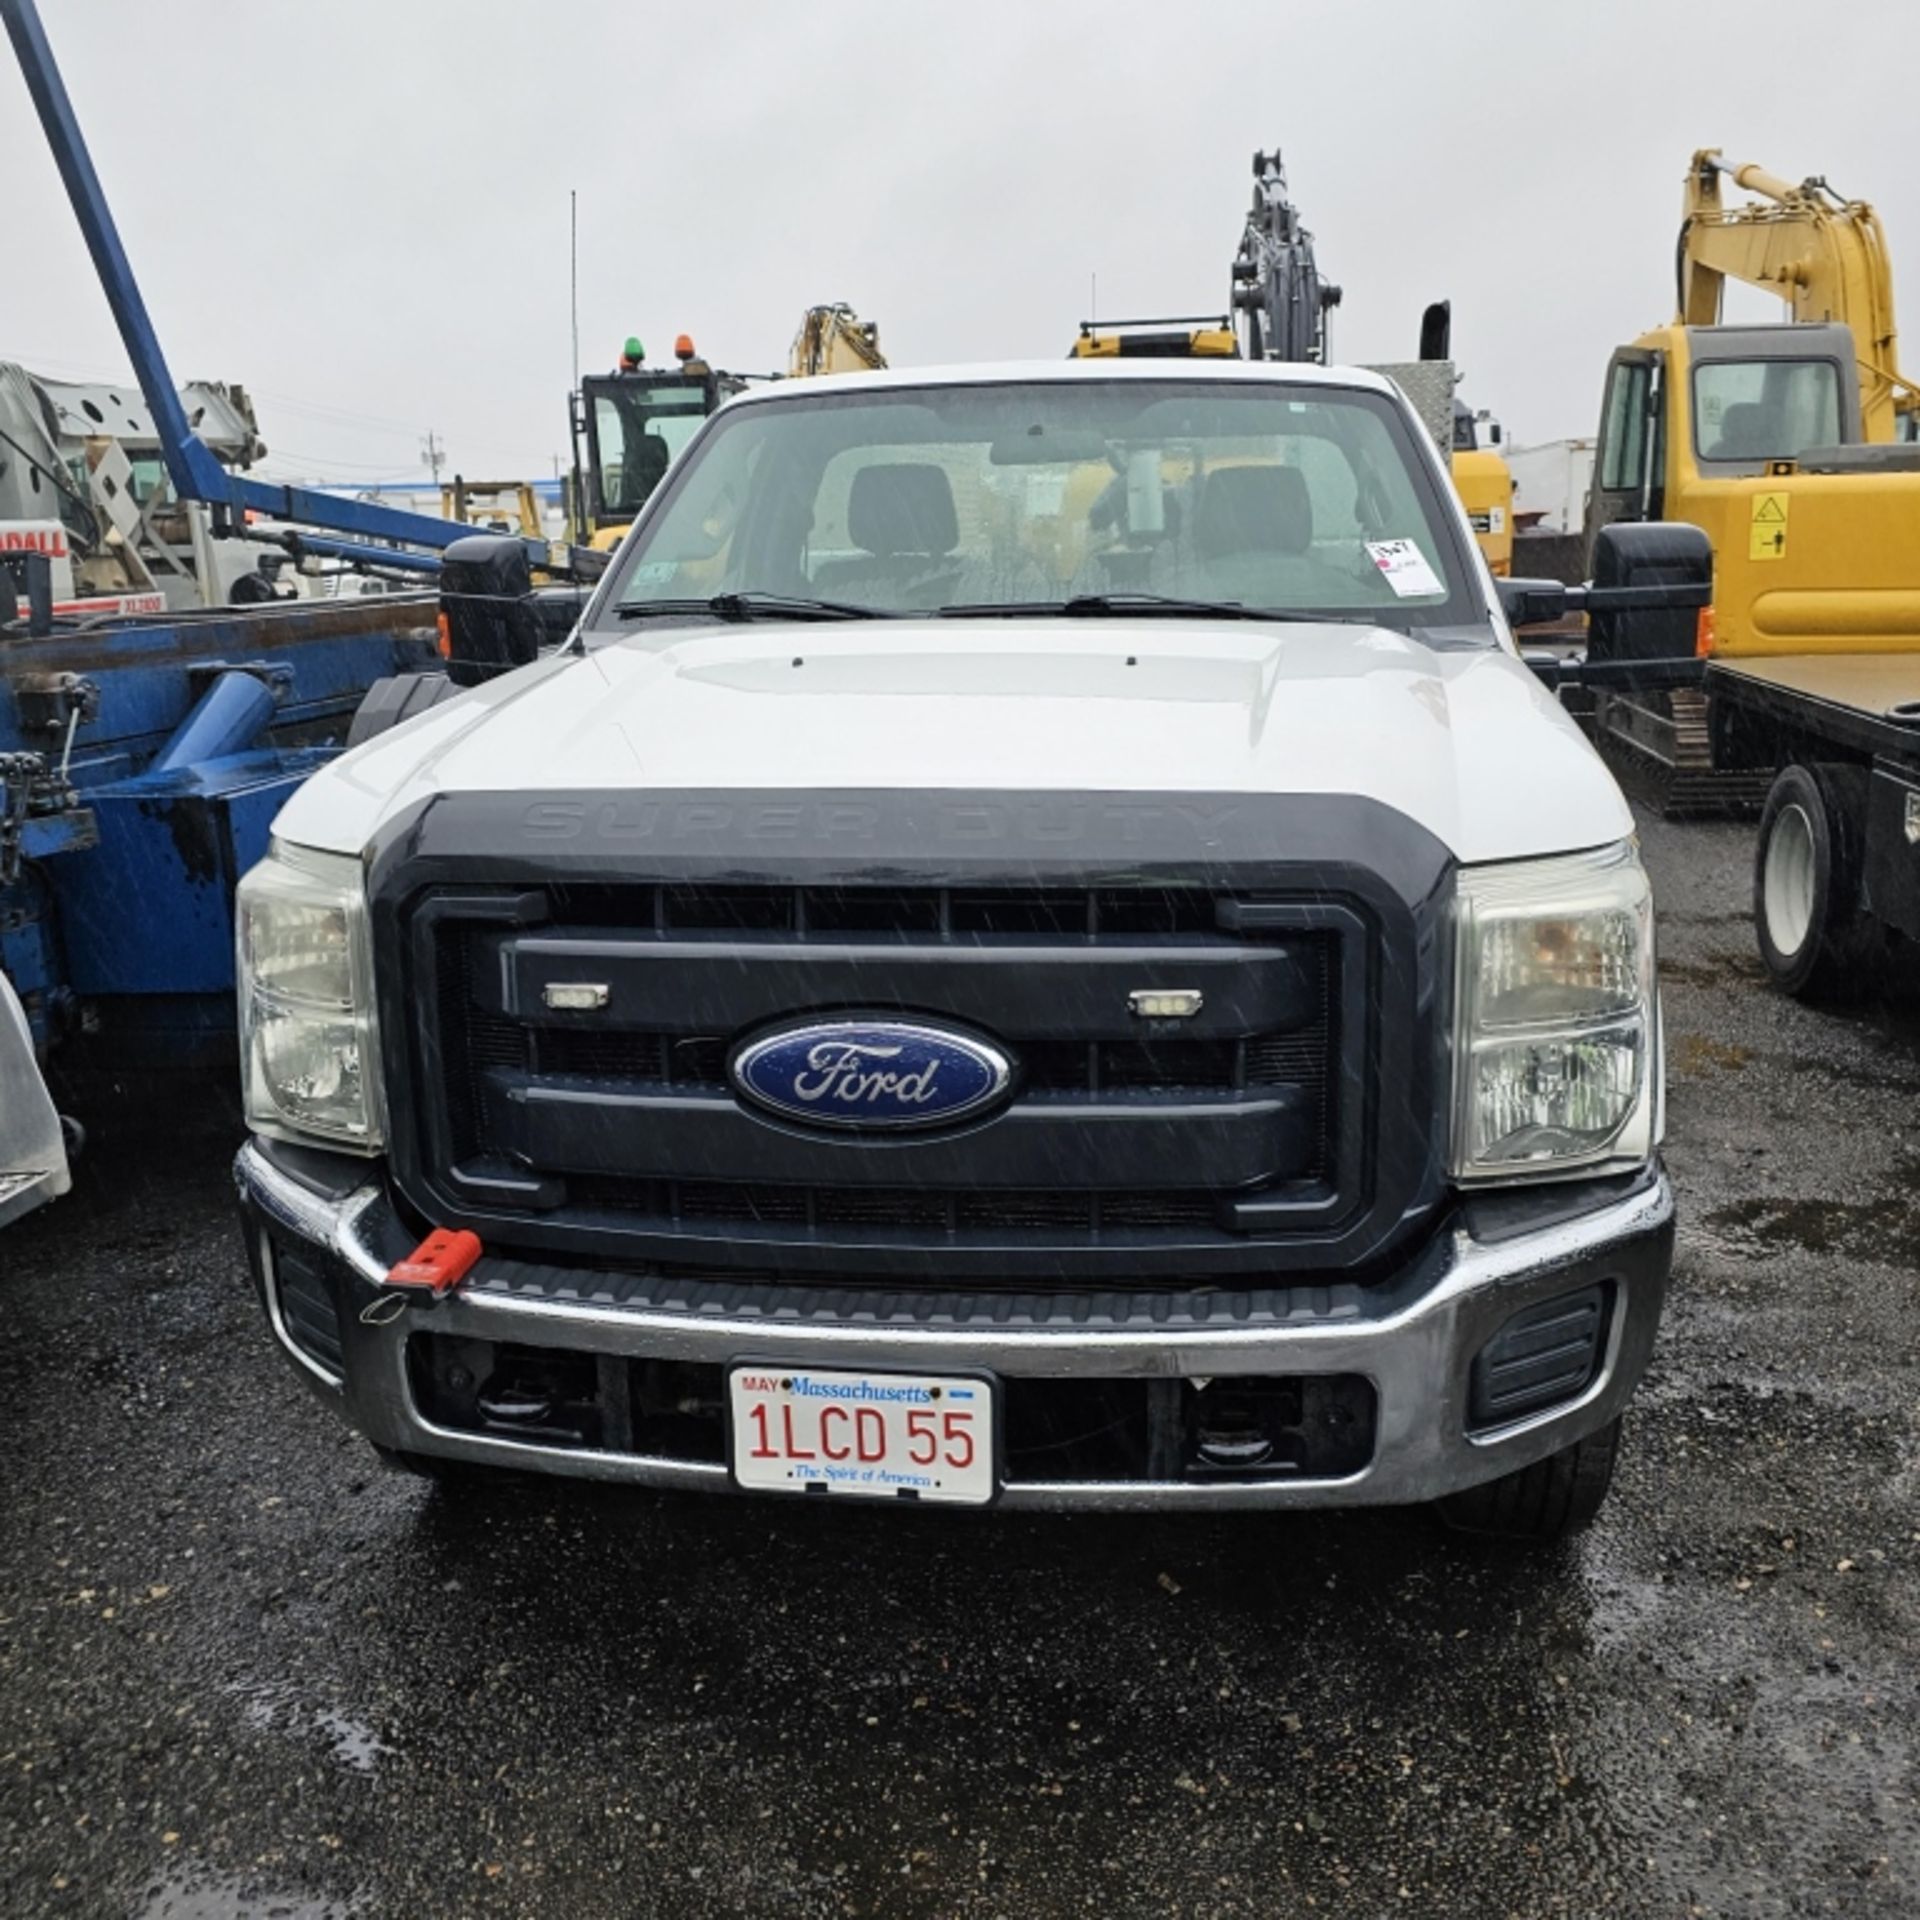 2013 Ford F250 Service Truck - Image 3 of 8